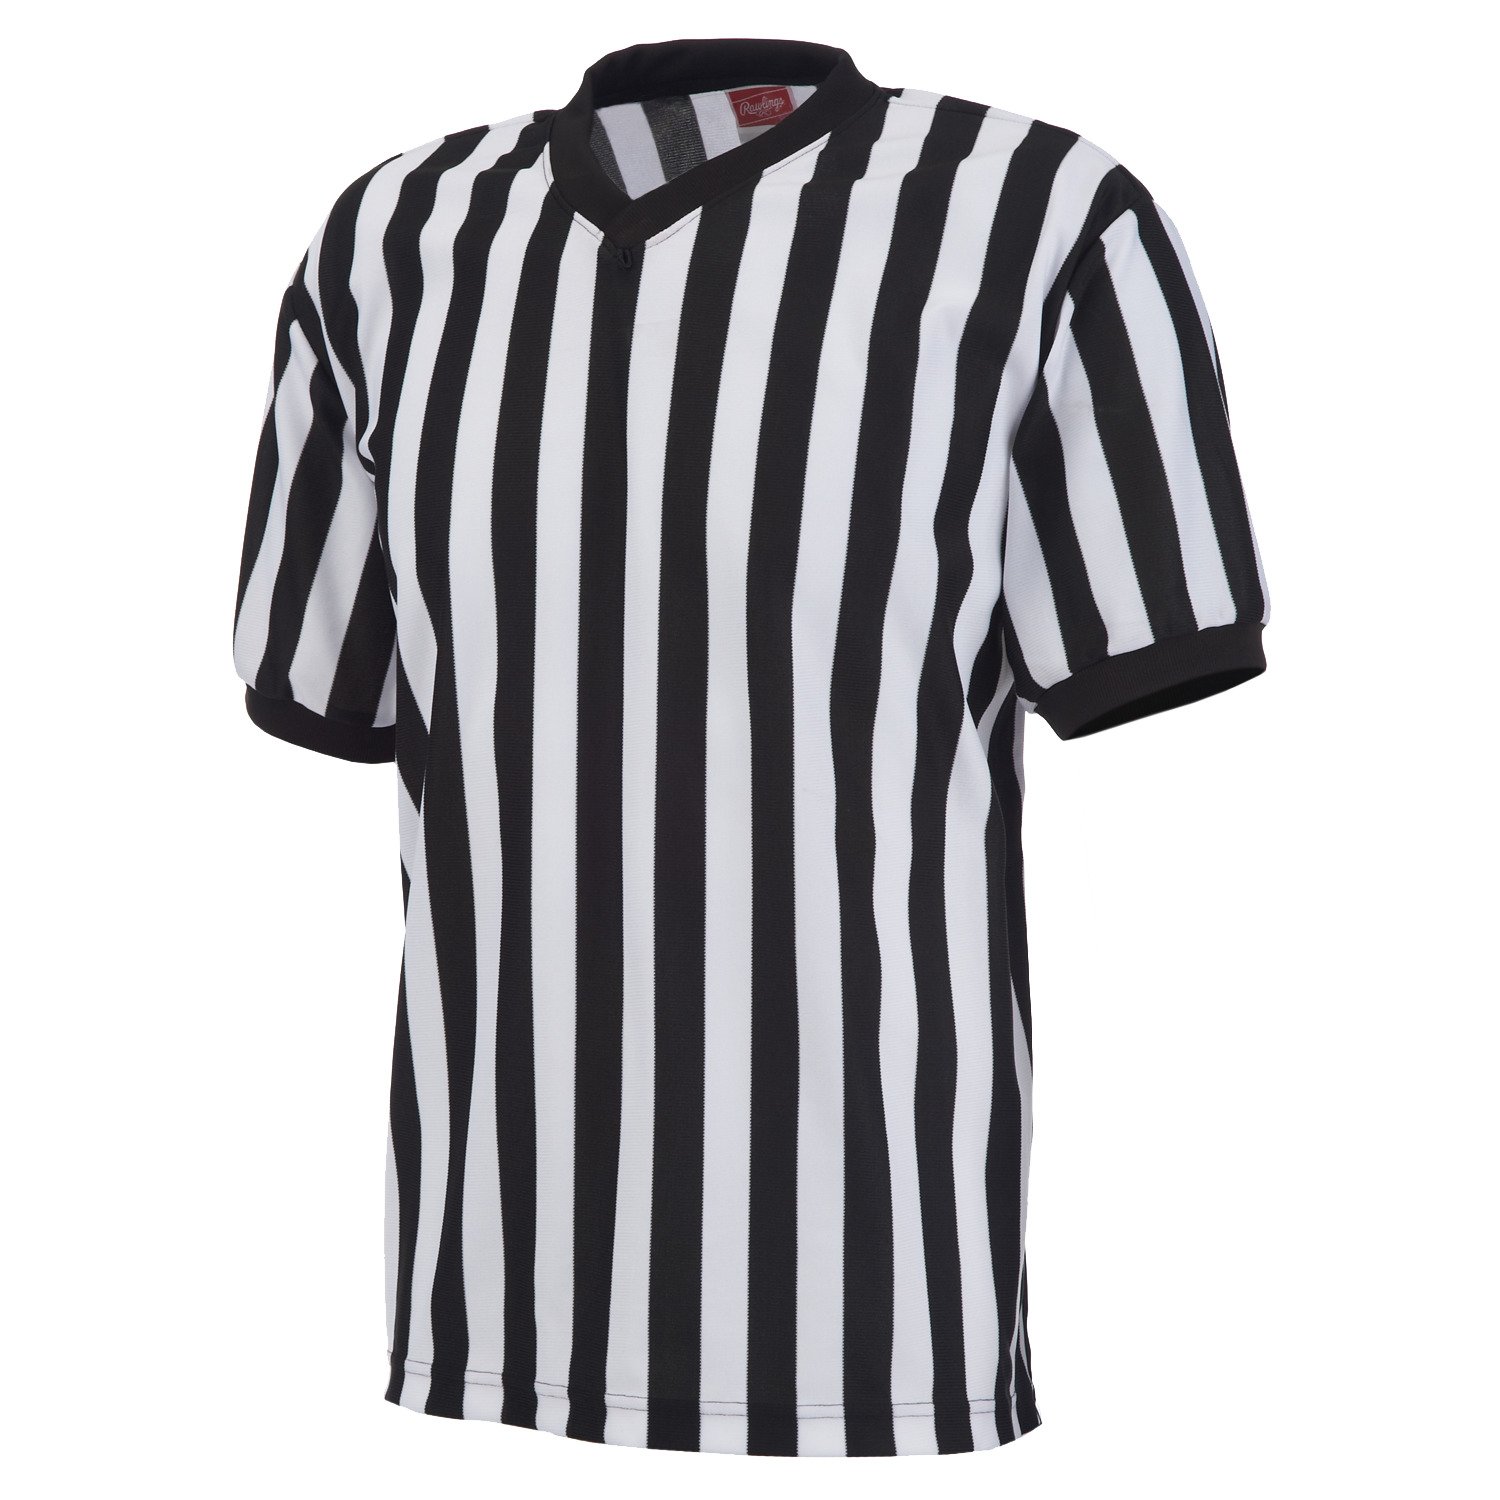 Wholesale Basketball Referee Uniforms For Comfortable Sportswear 